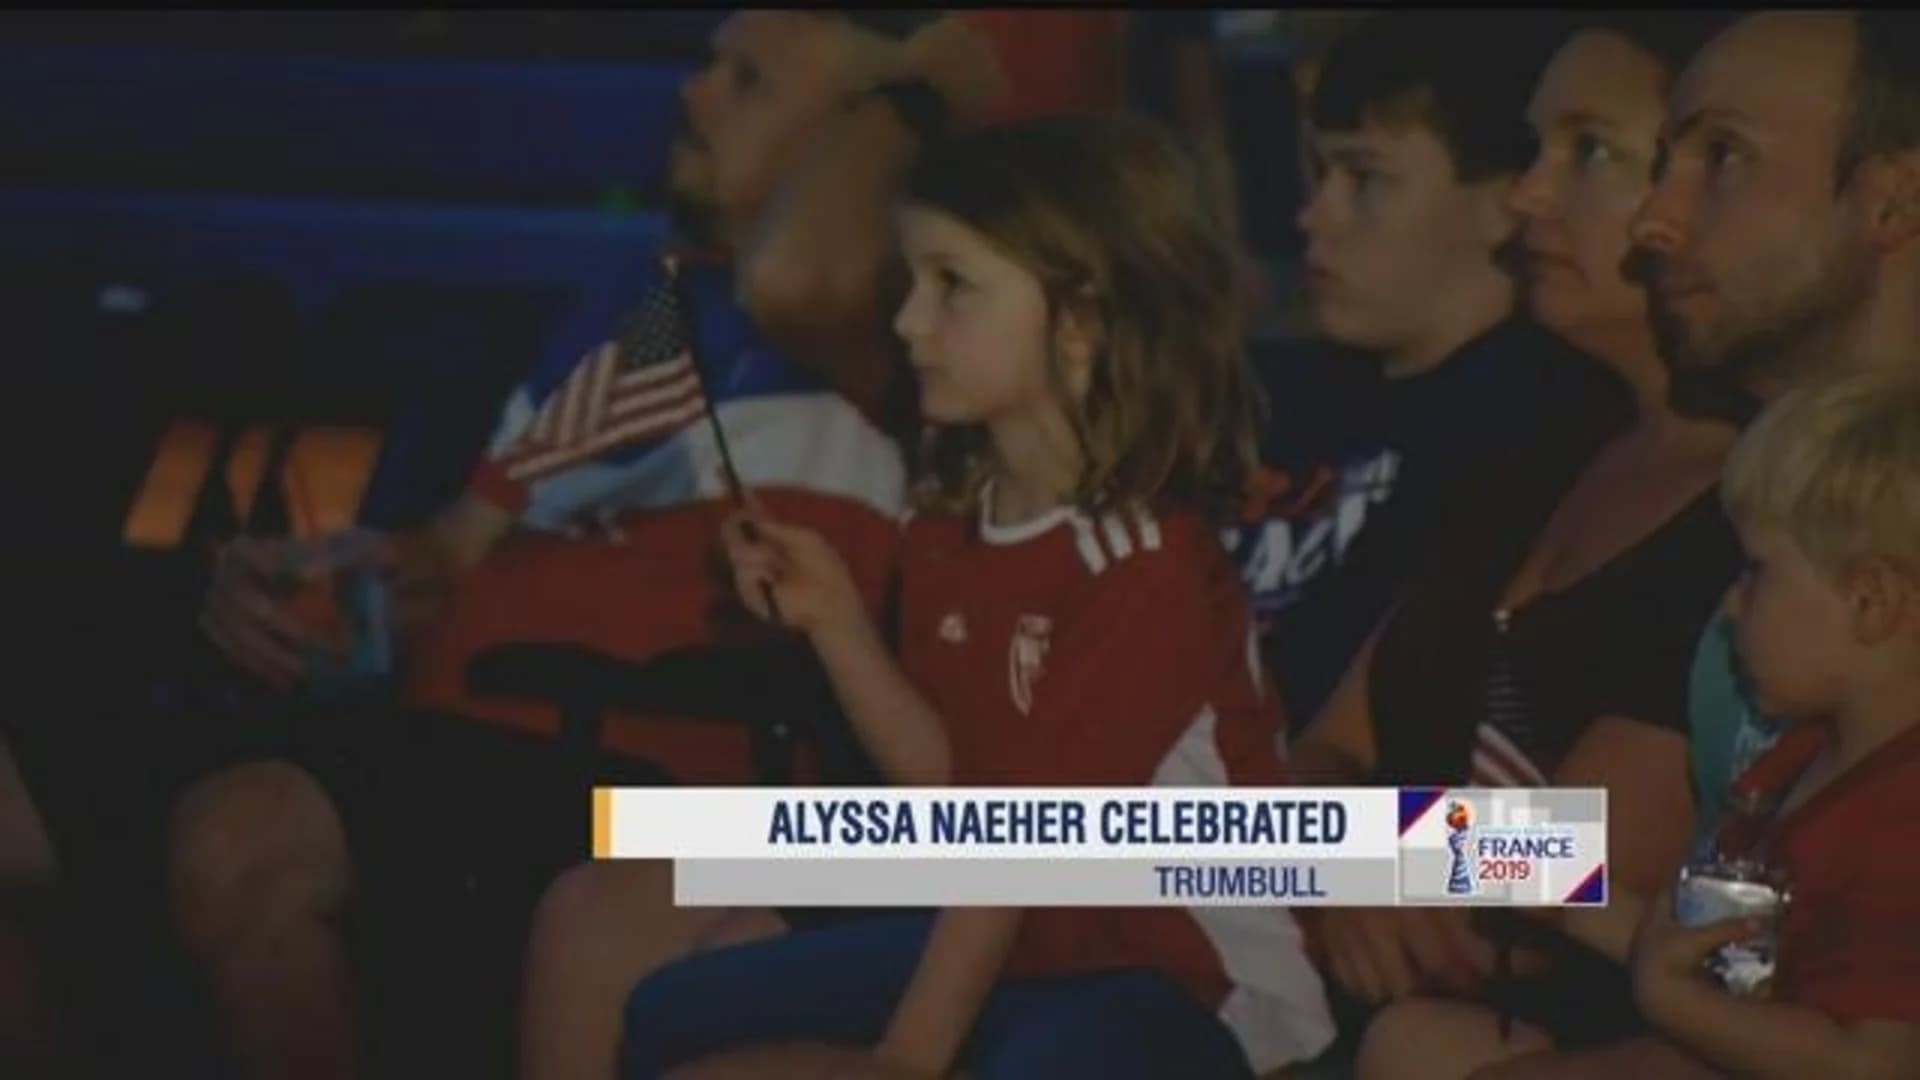 People in Trumbull celebrate local Alyssa Naeher in World Cup